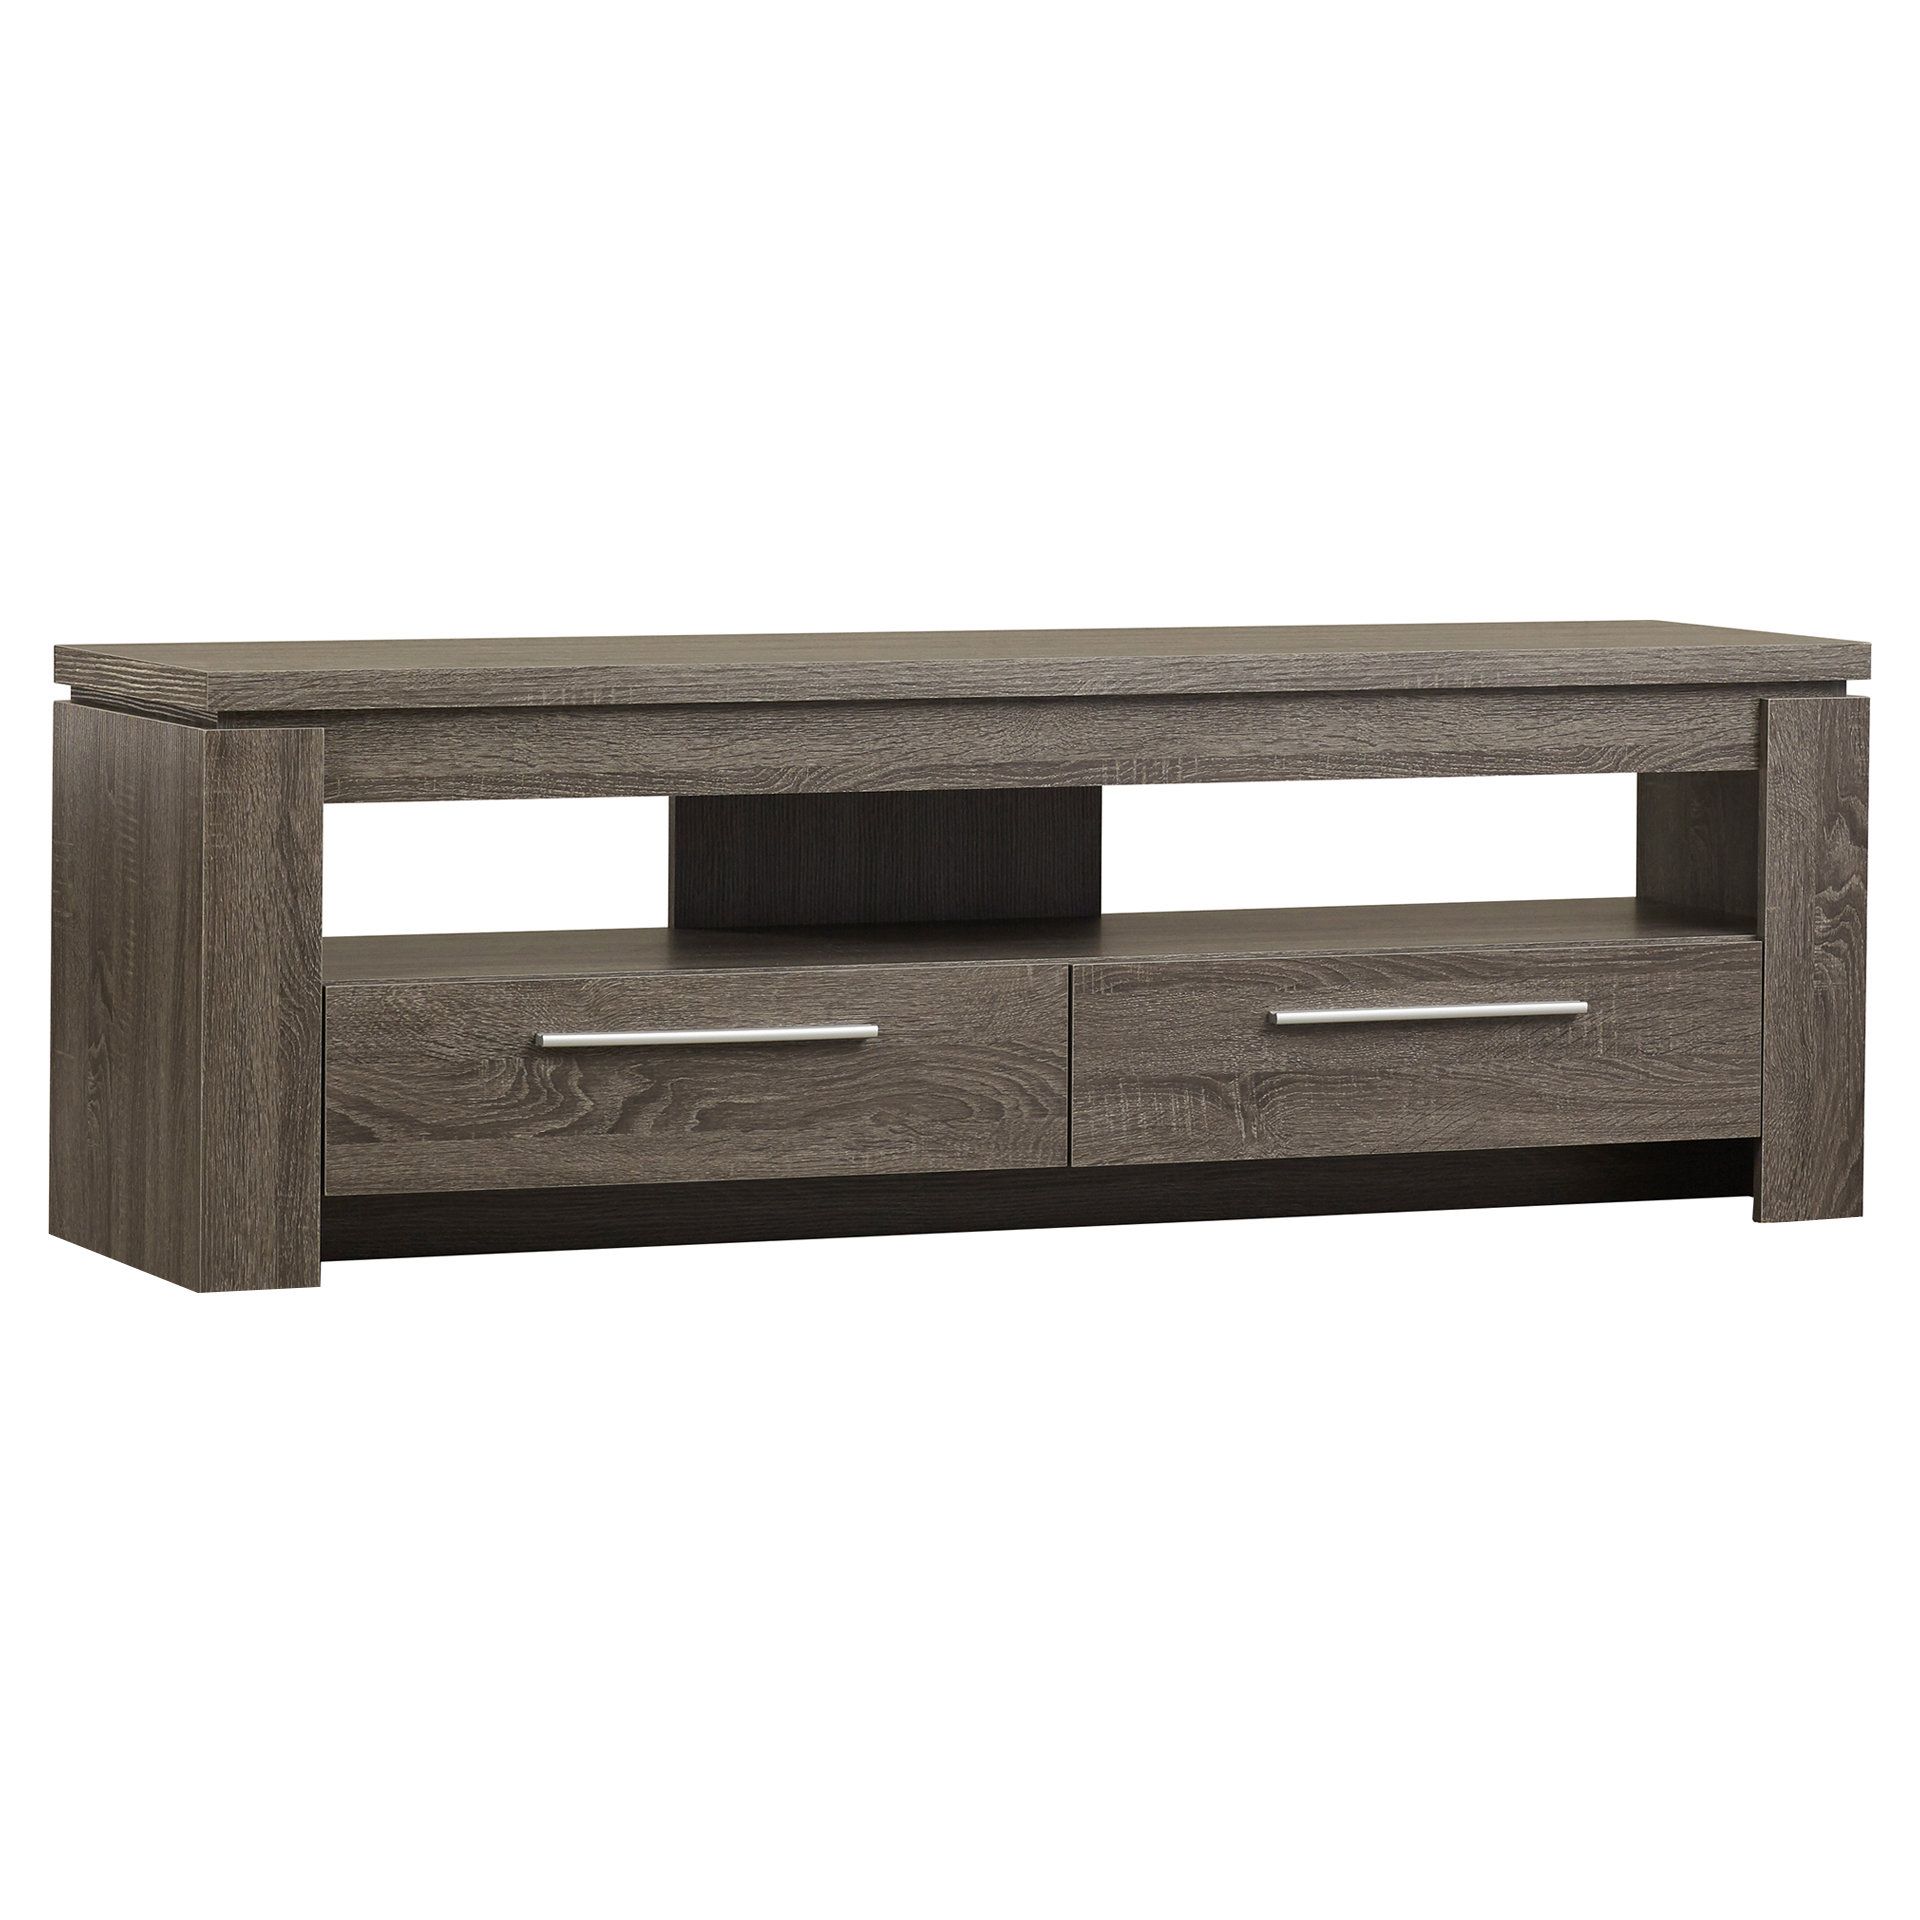 Rorie Tv Stand & Reviews | Allmodern Regarding Lauderdale 74 Inch Tv Stands (View 5 of 20)